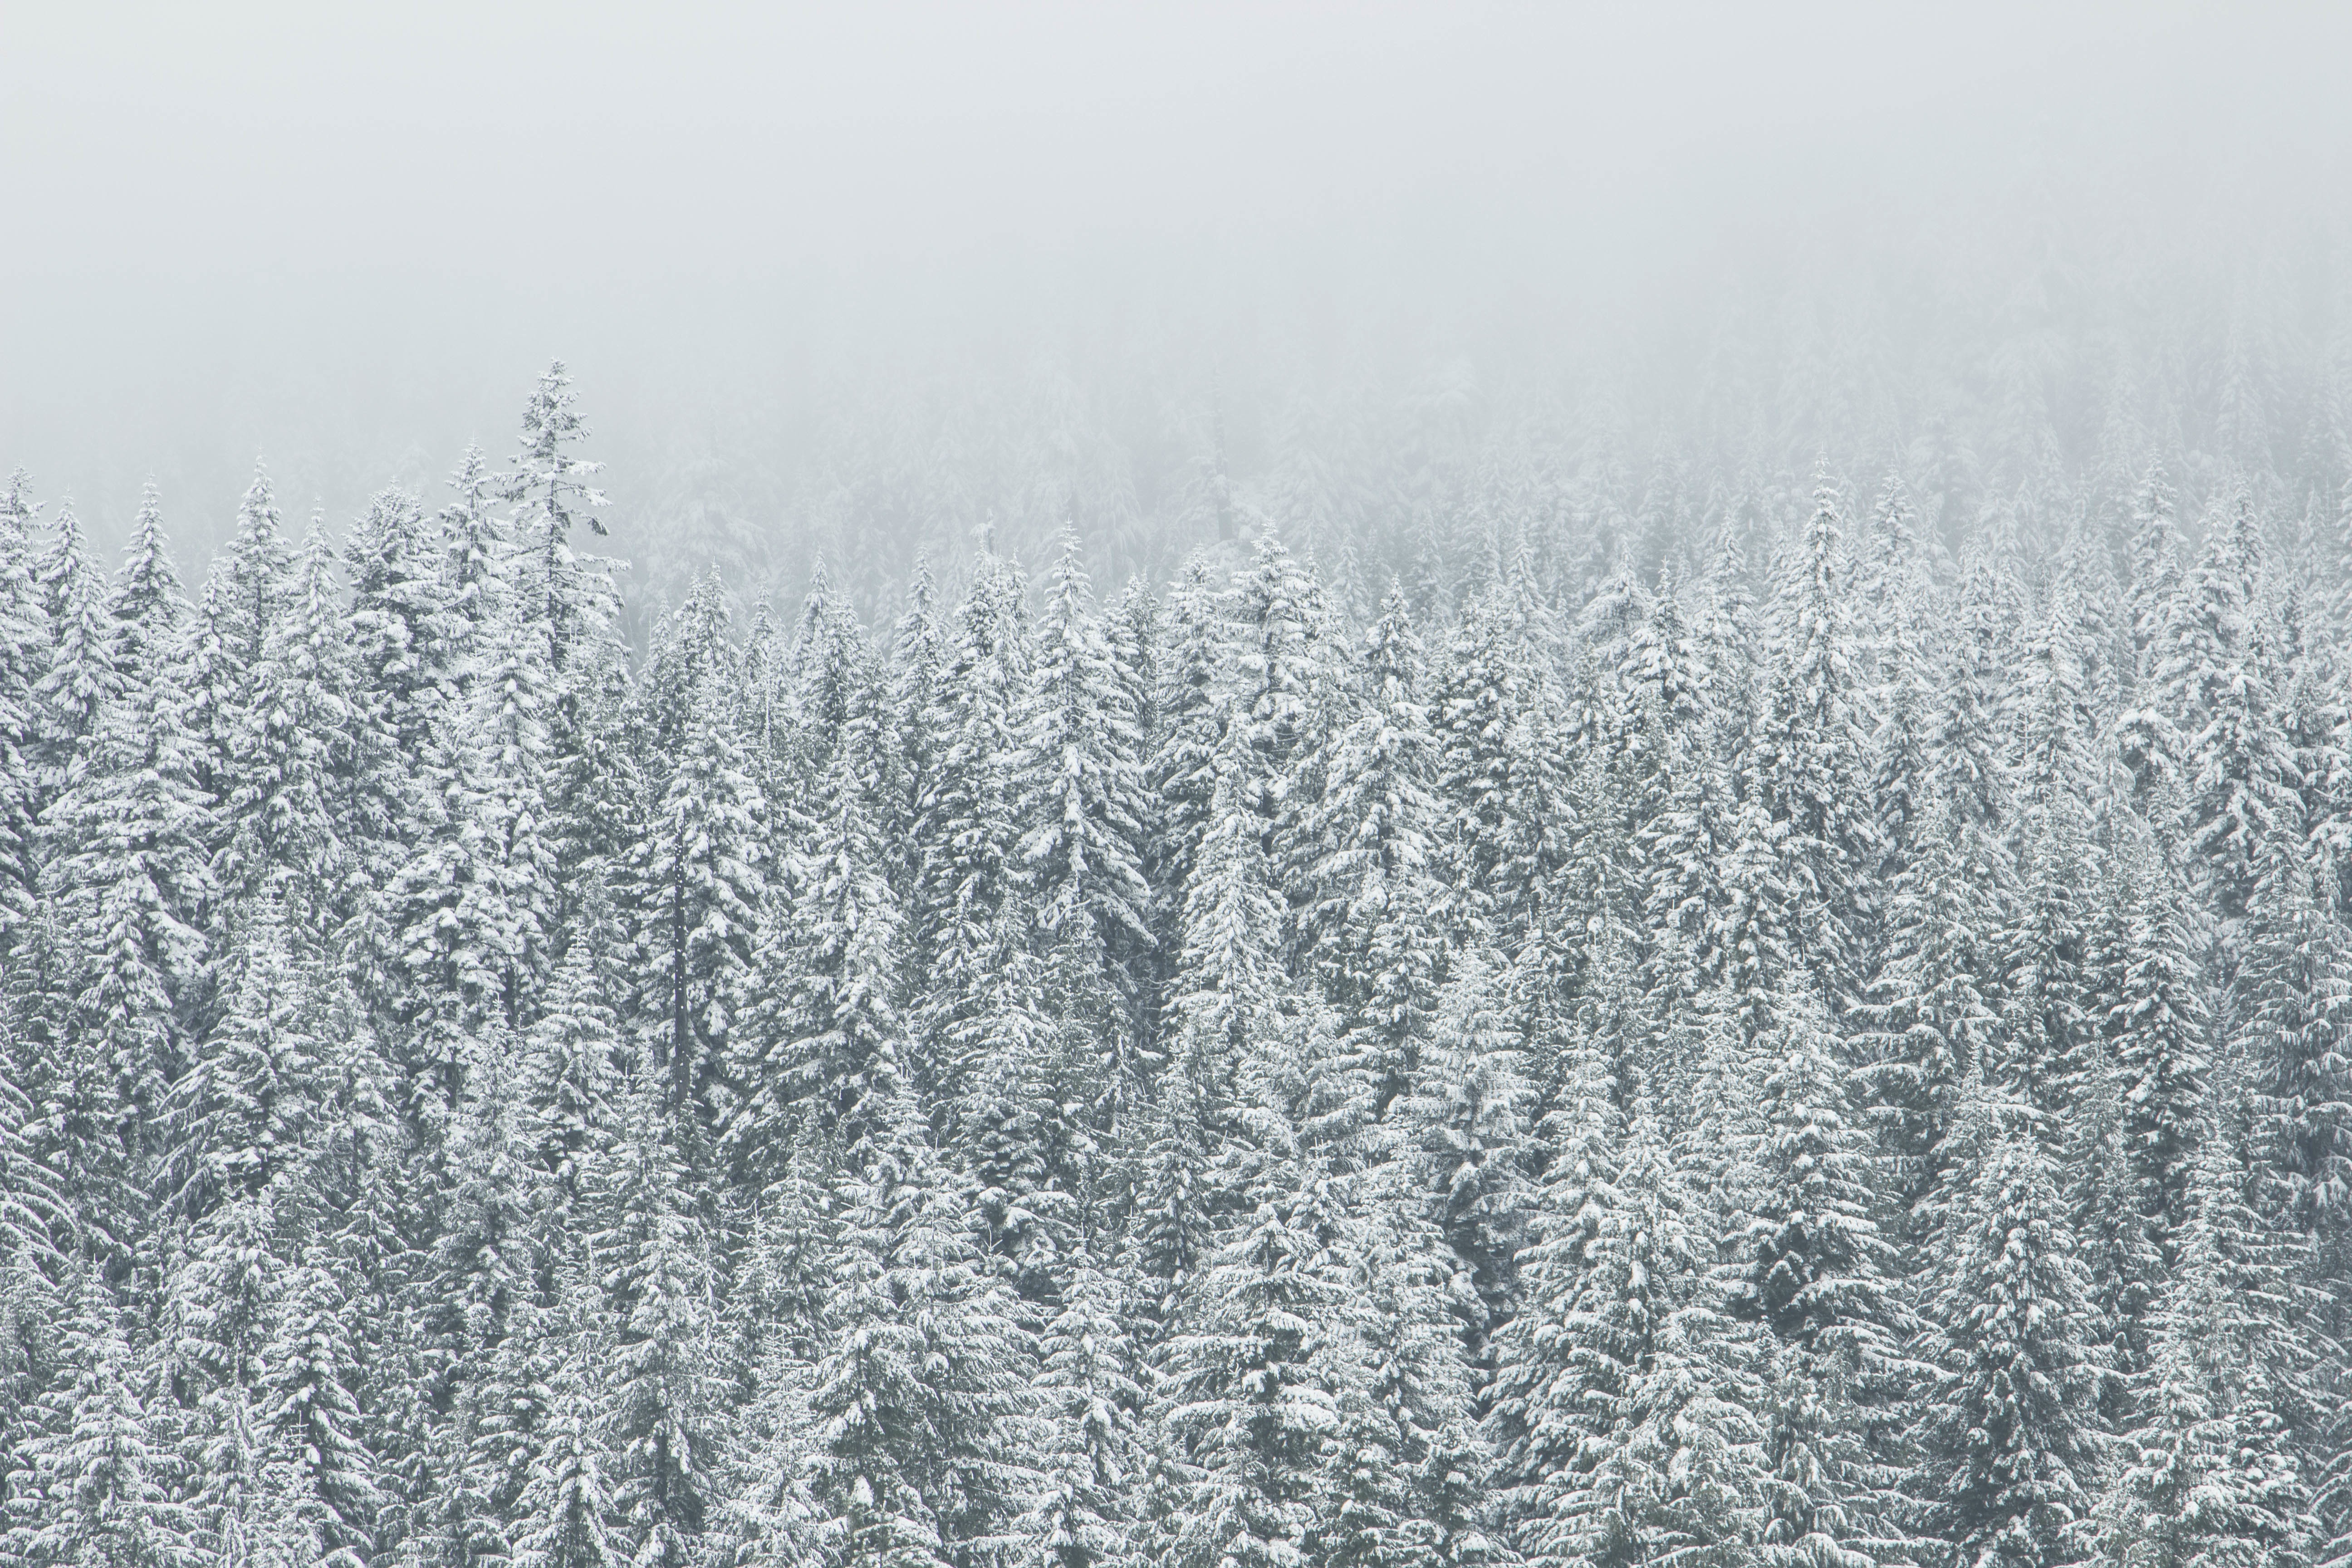 Bunch of Trees, Bunch, Cold, Forest, Green, HQ Photo